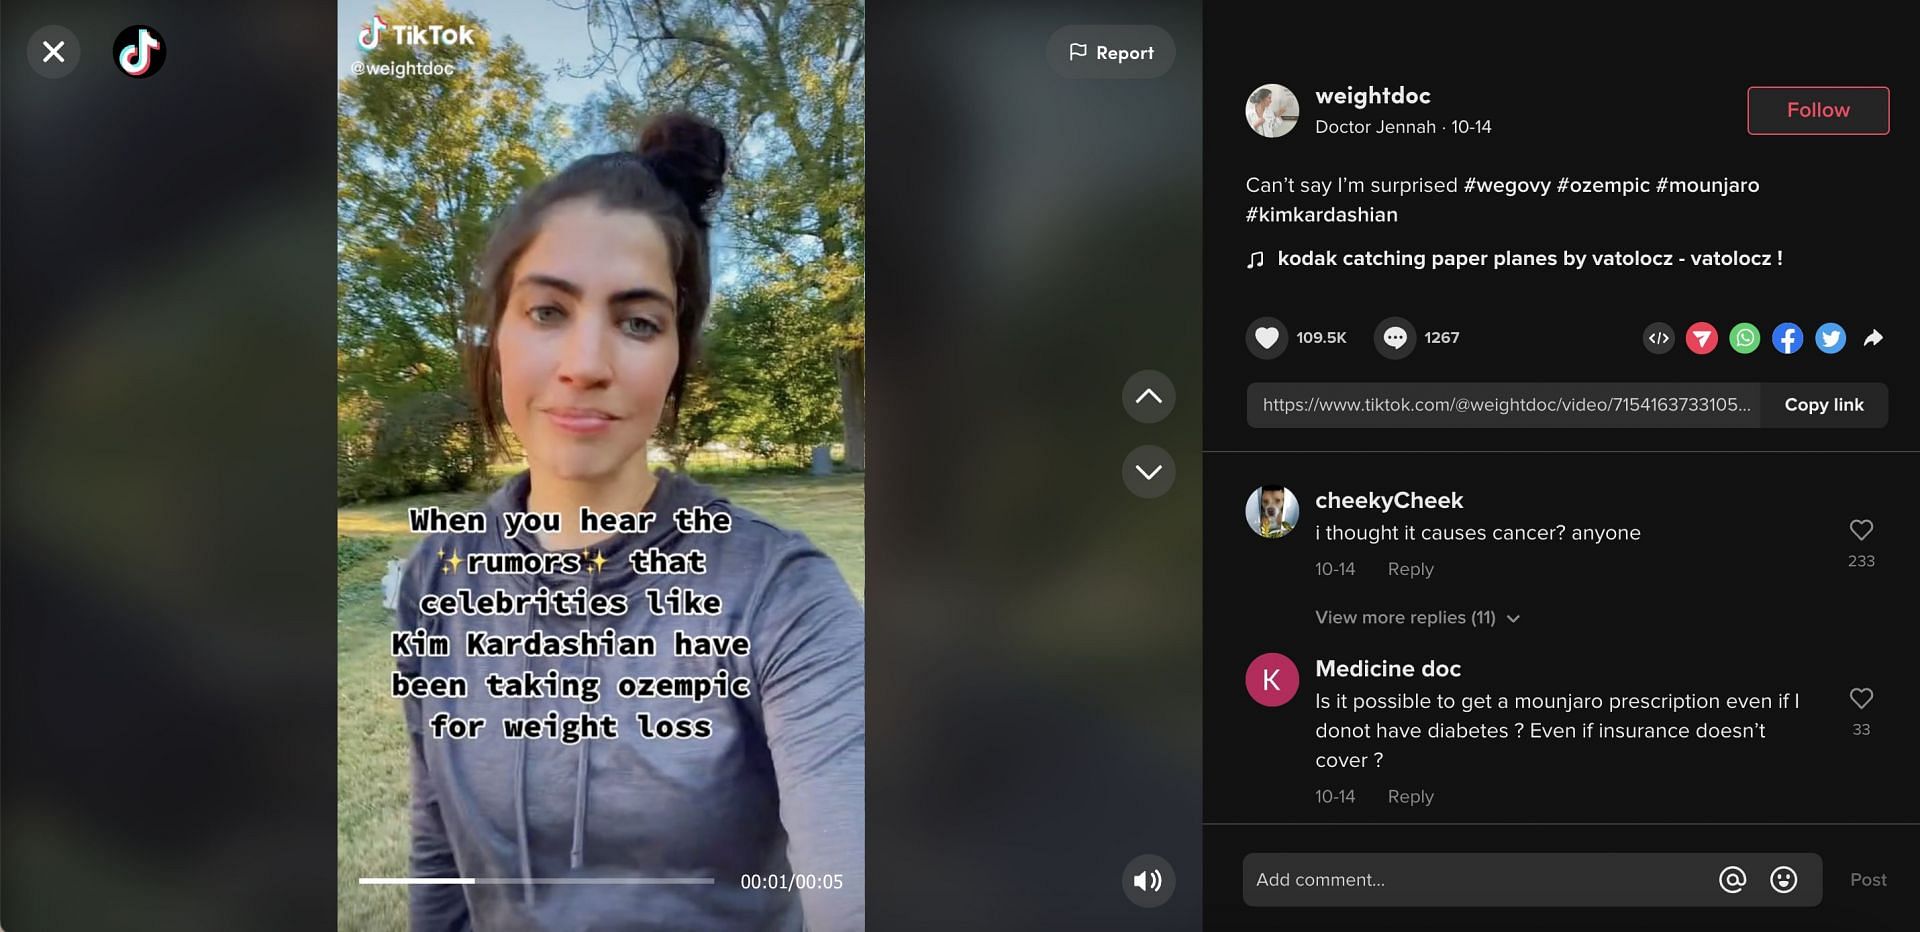 Netizens on social media talk about the rumor of celebrities consuming the drug for weight loss. (Image via TikTok)